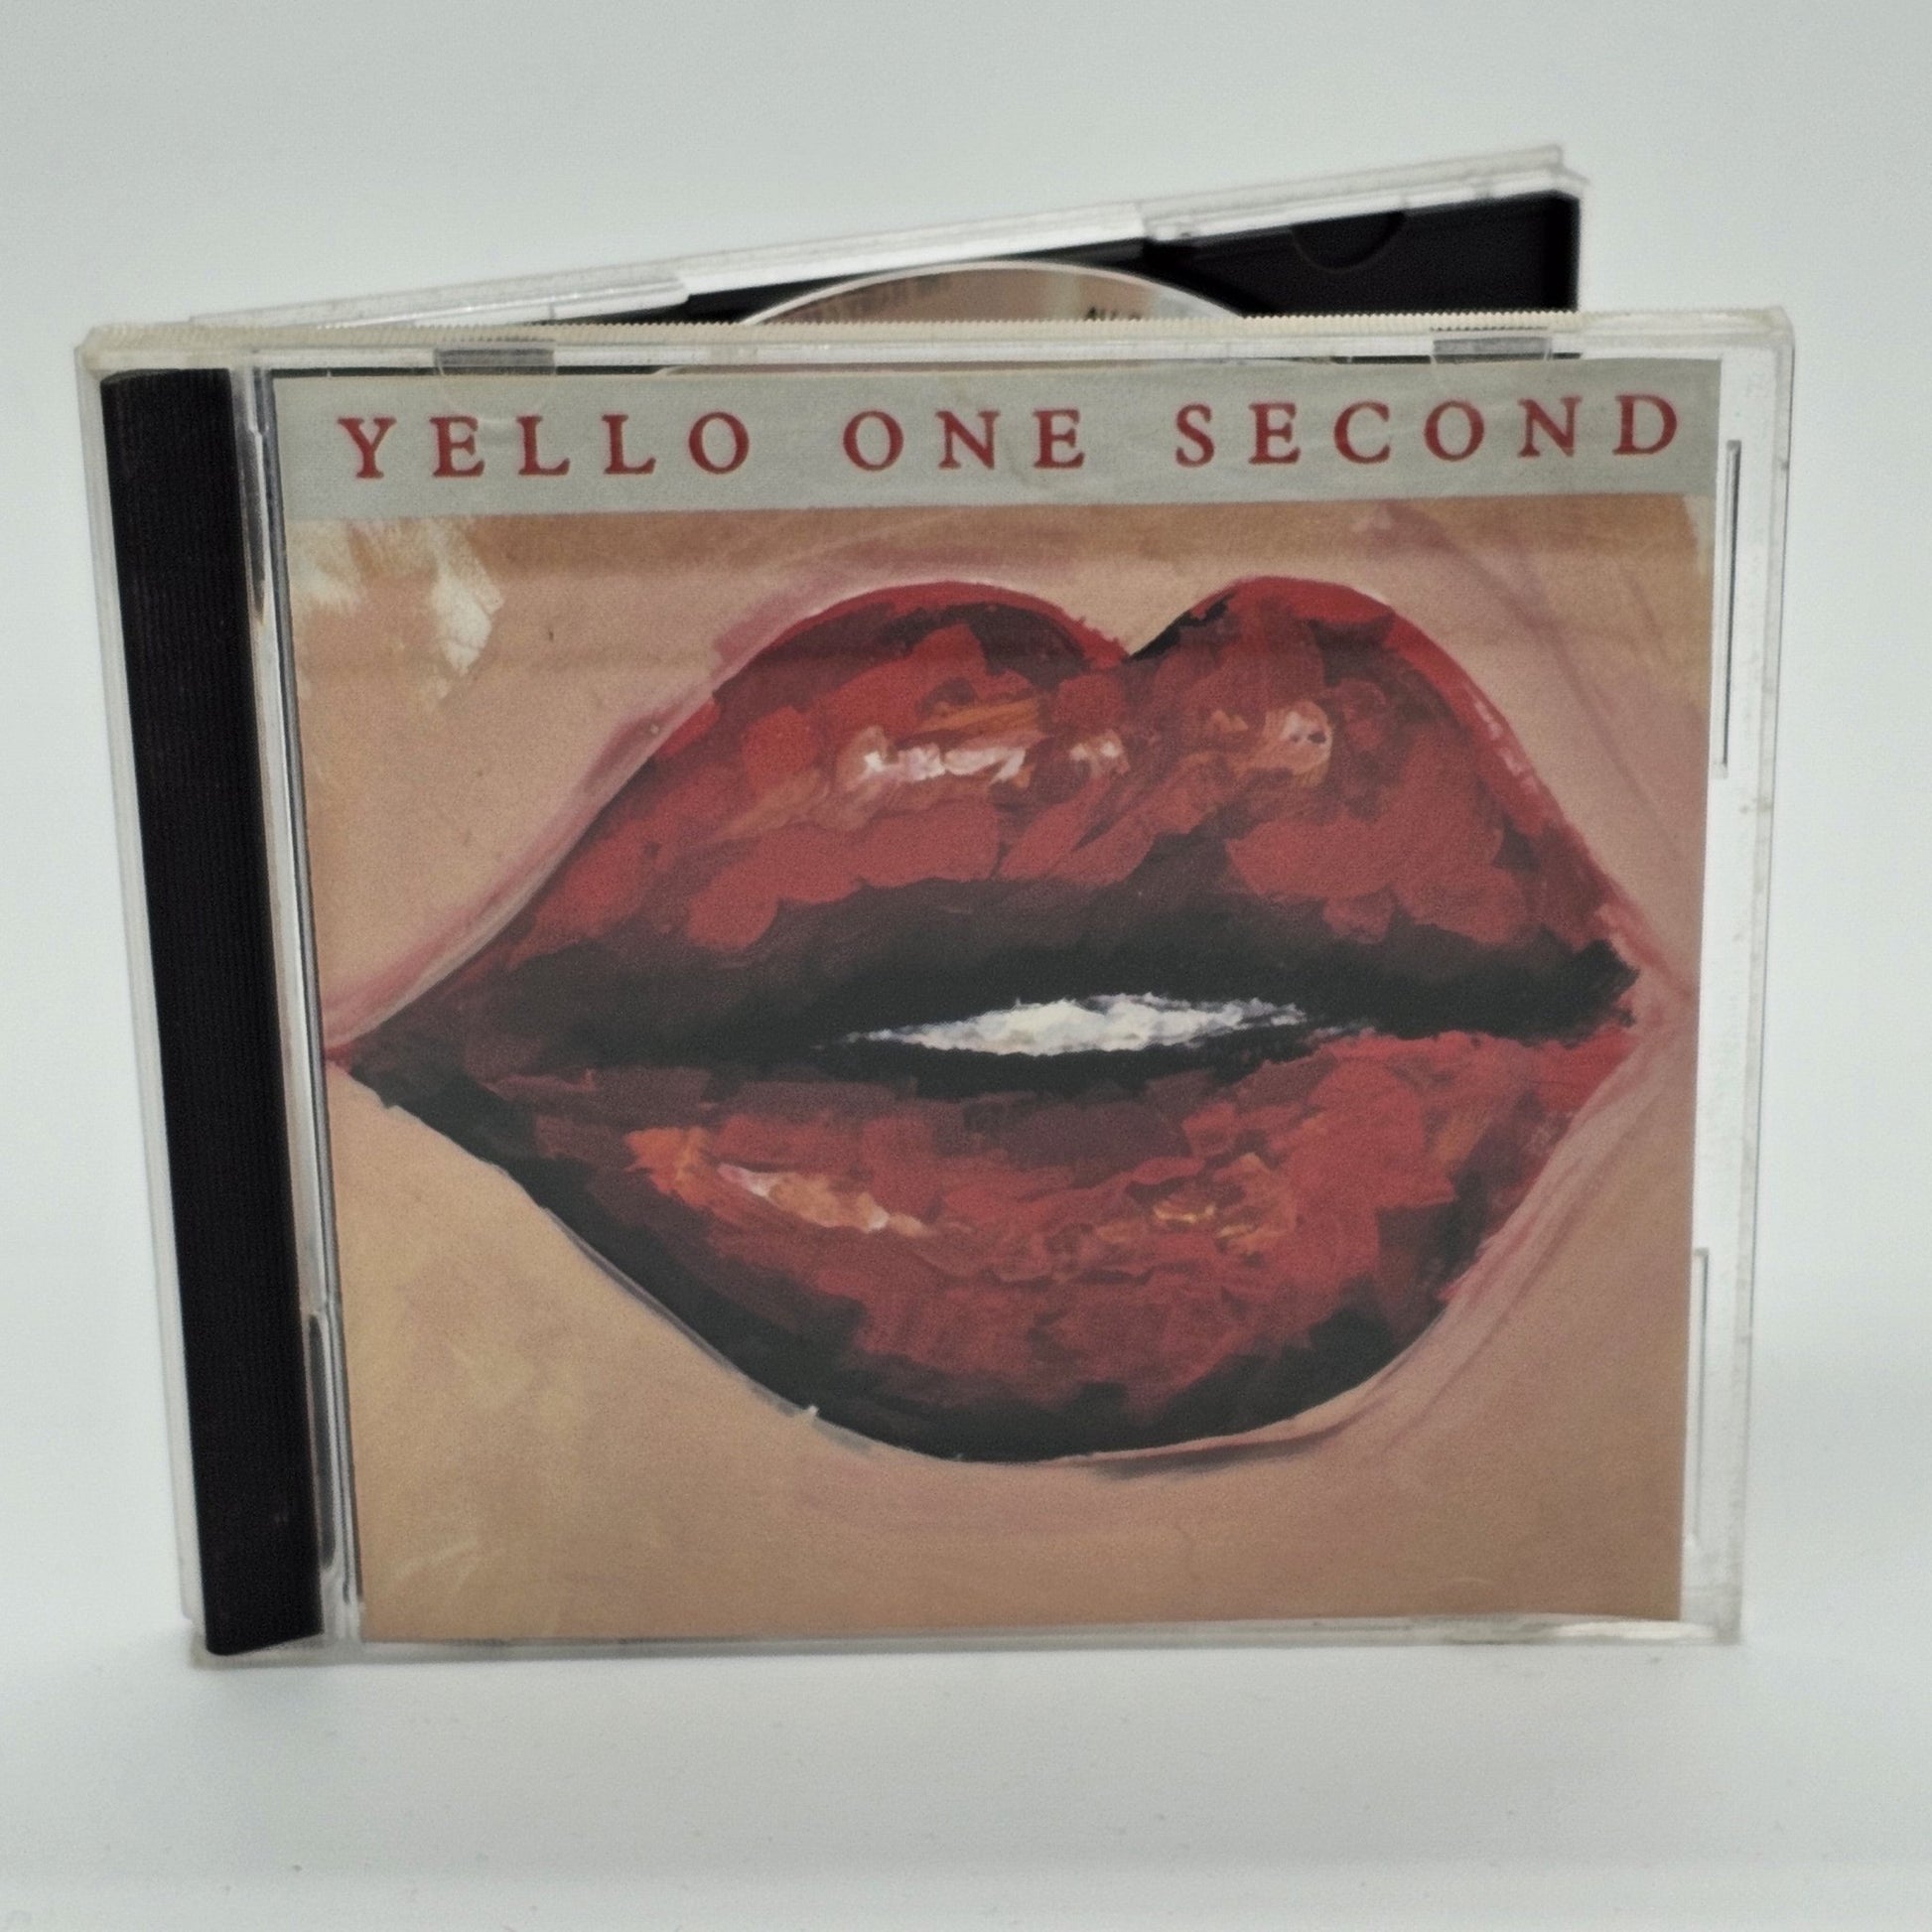 Polygram Records - Yello | One Second | CD - Compact Disc - Steady Bunny Shop